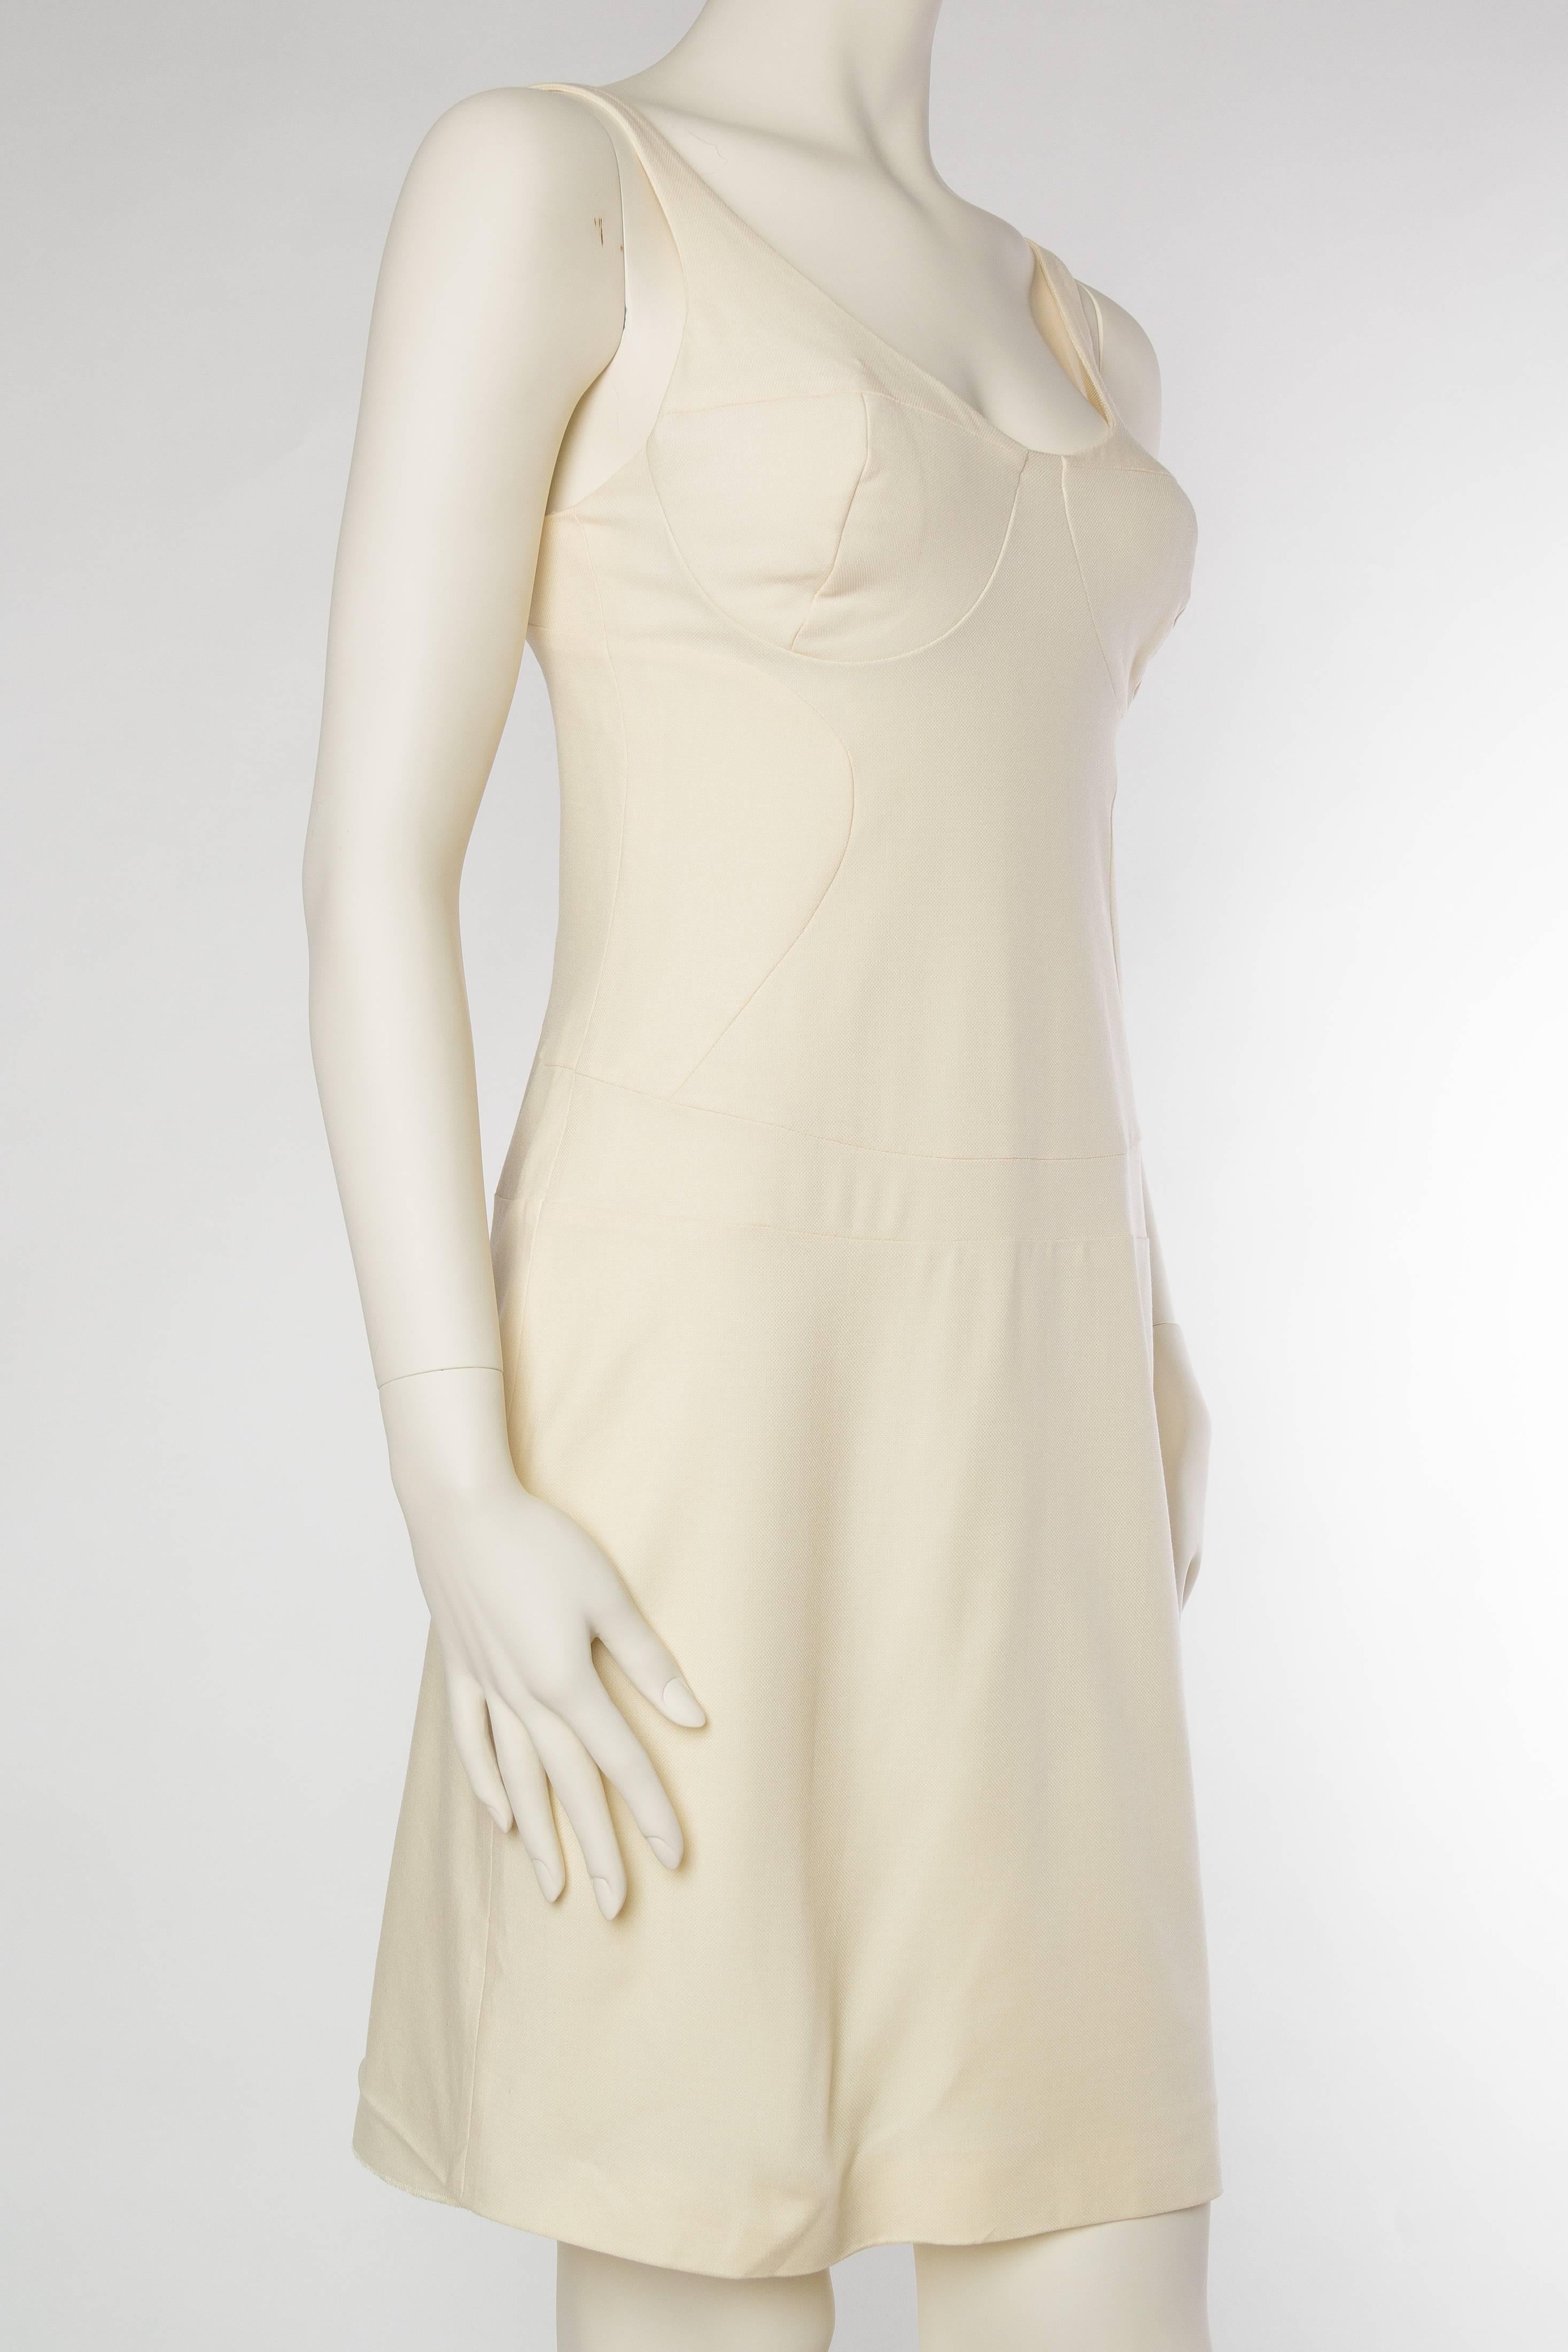 Gianni Versace Versus Stretch Cream Underwire Dress with Slit In Excellent Condition In New York, NY